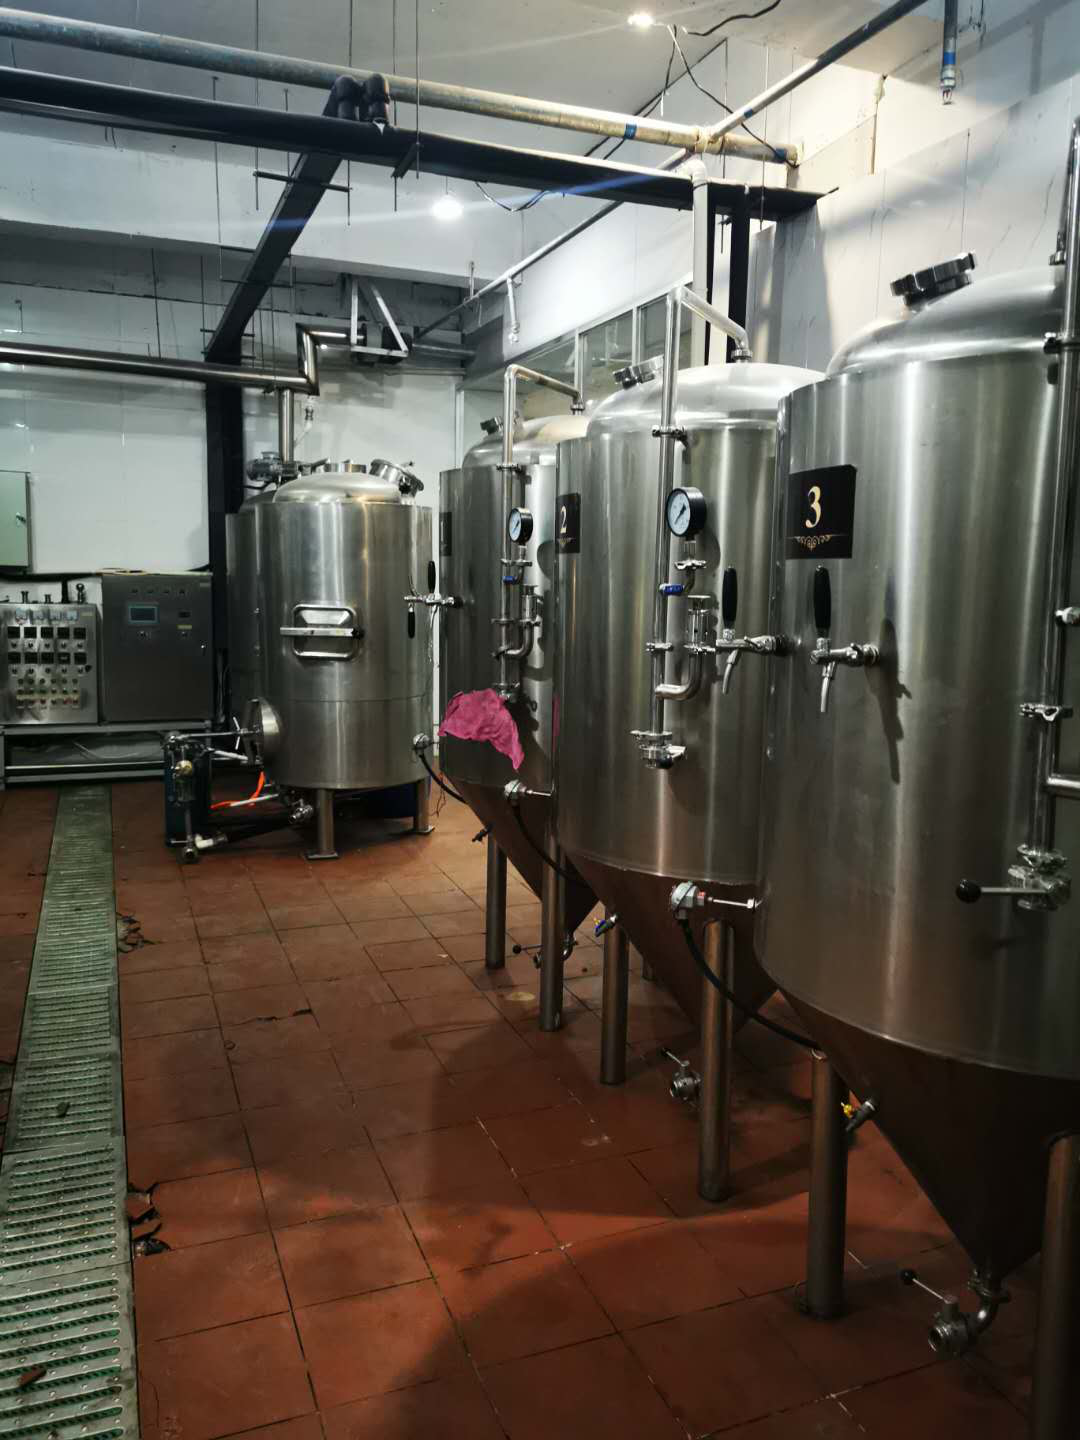 SUS304 ALL in one home craft beer brewing equipment and system made by WEMAC factory widely used in hotel